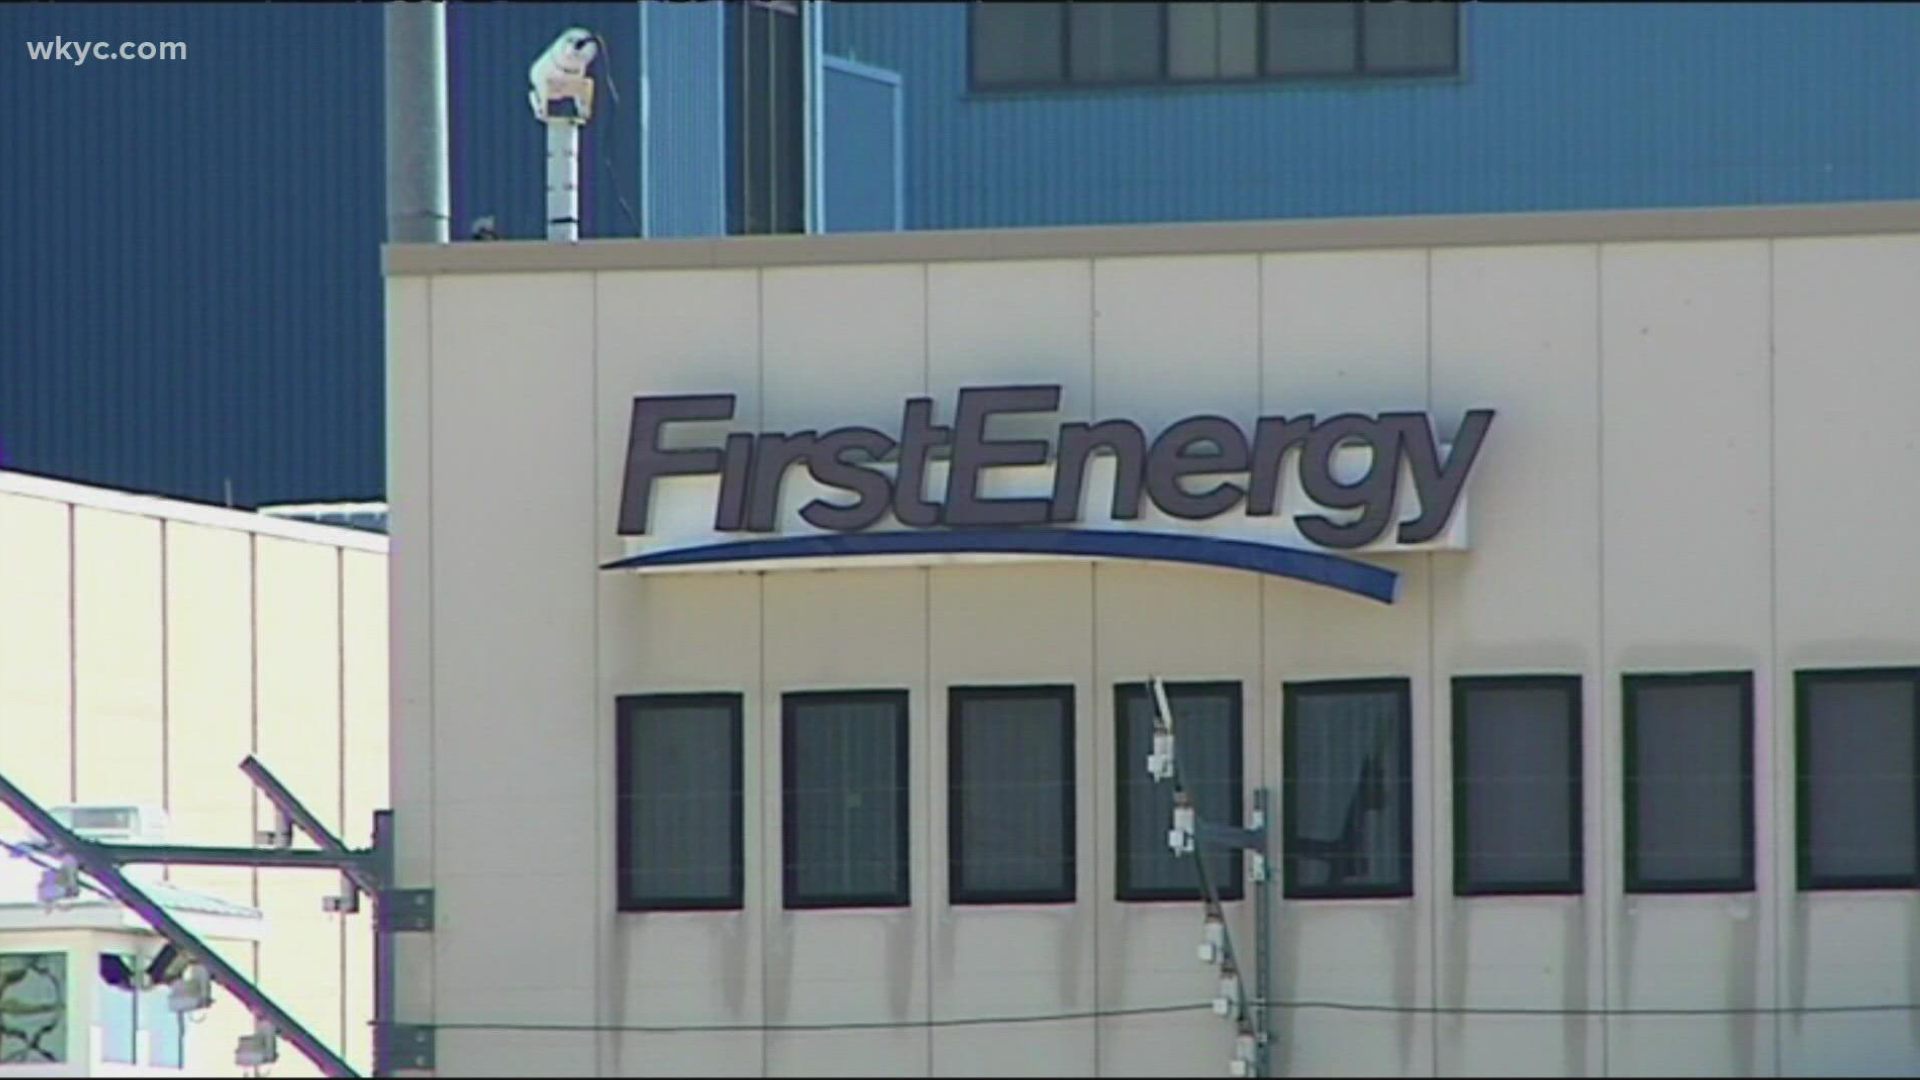 The settlement between Akron-based FirstEnergy Corp. and the Ohio Consumers' Counsel and other groups was announced Monday. It must be approved by PUCO.